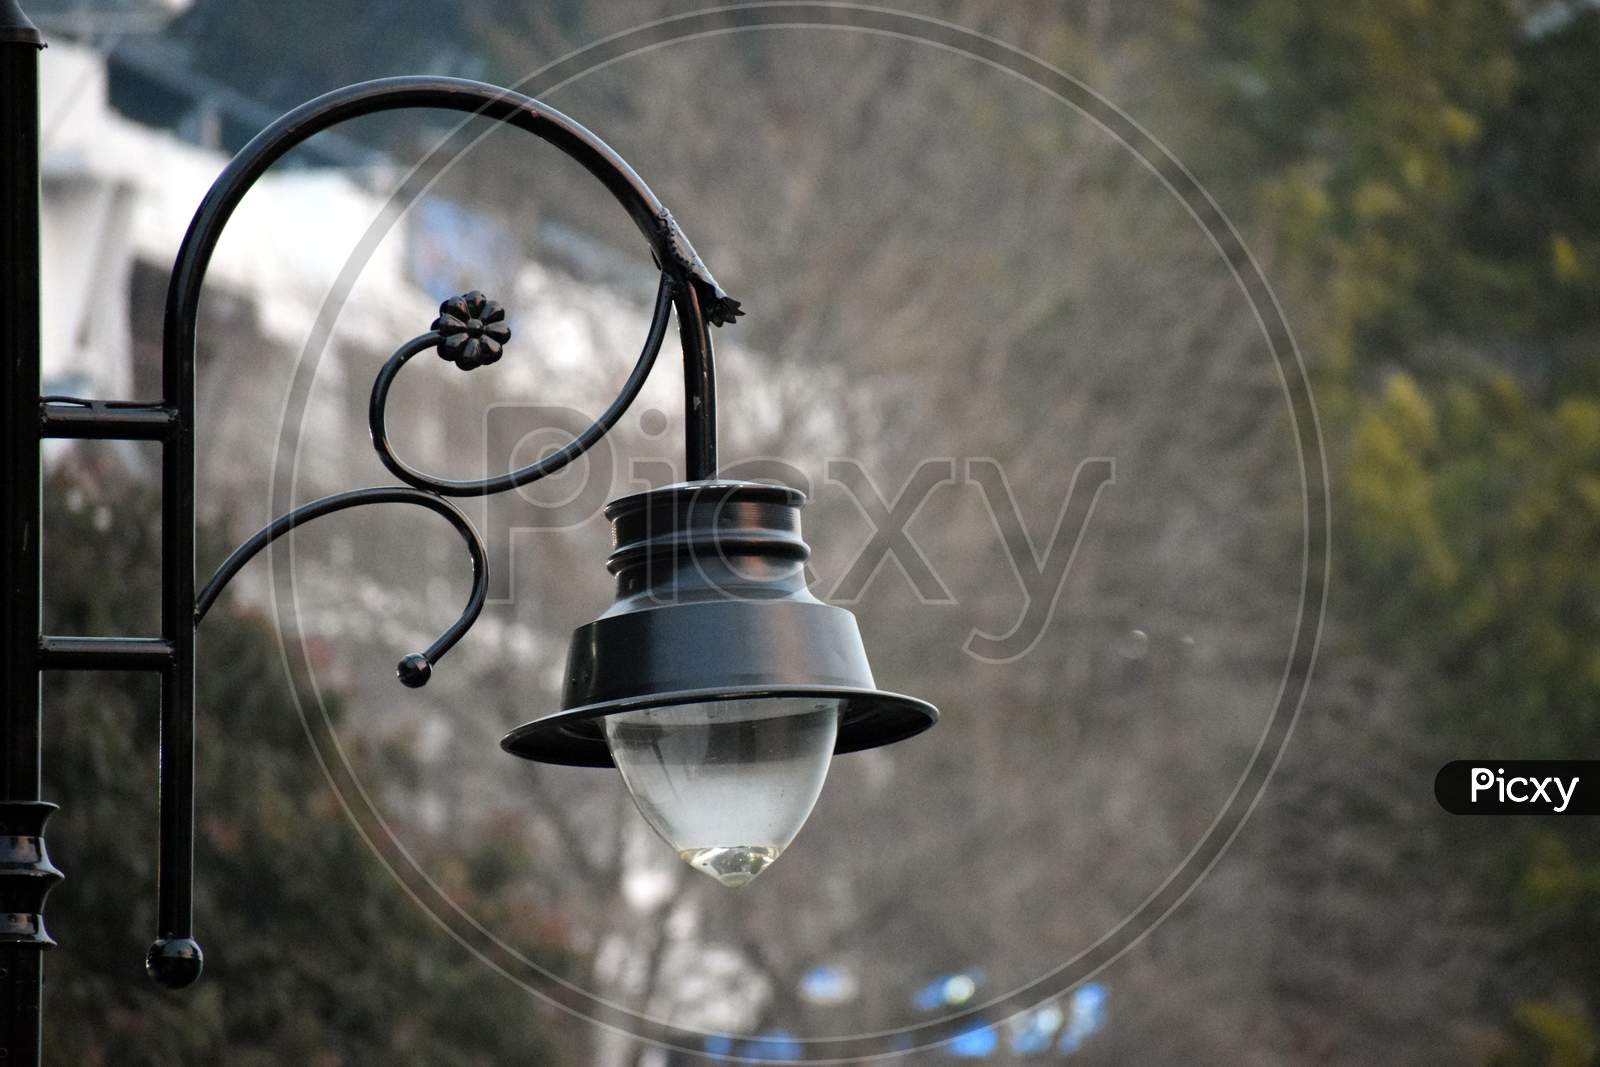 Beautiful Picture Of Black Road Side Lamp In India. Background Blur